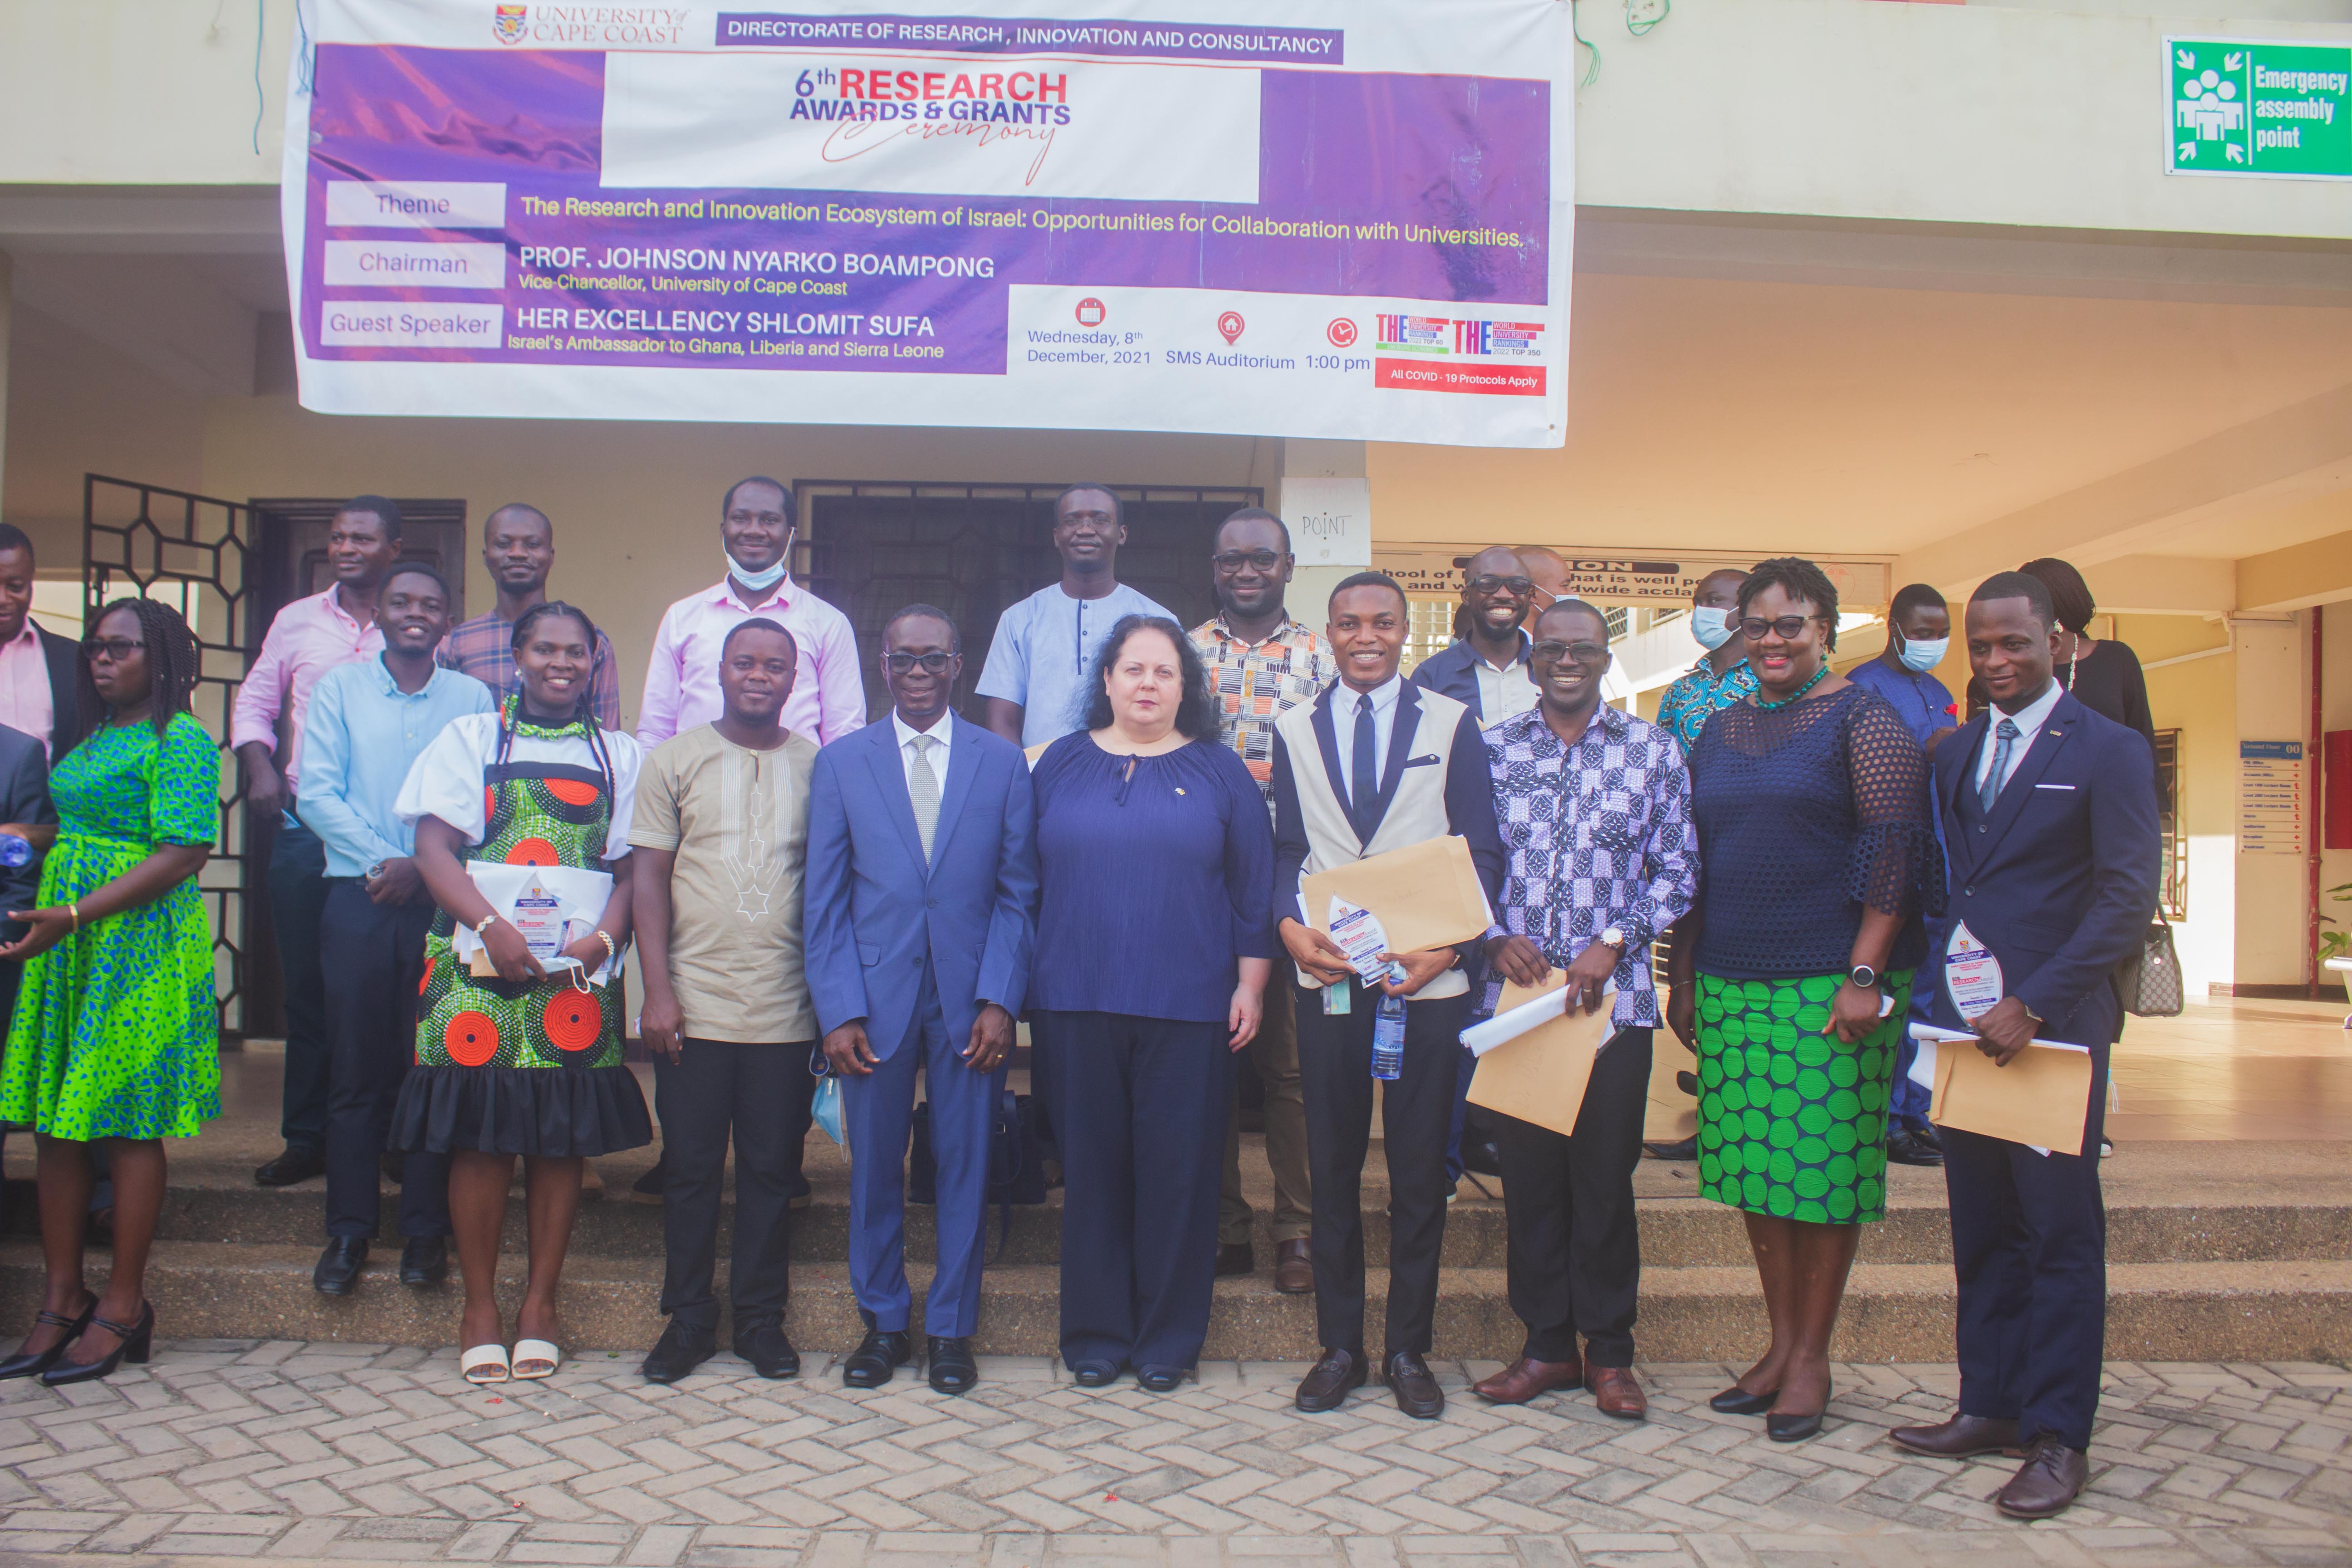 SoPPS winning team with the UCC Vice-chancellor (Prof Johnson Nyarko Boampong) and Isreal's Ambassador to Ghana (Her Excellency Shlomit Sufa)